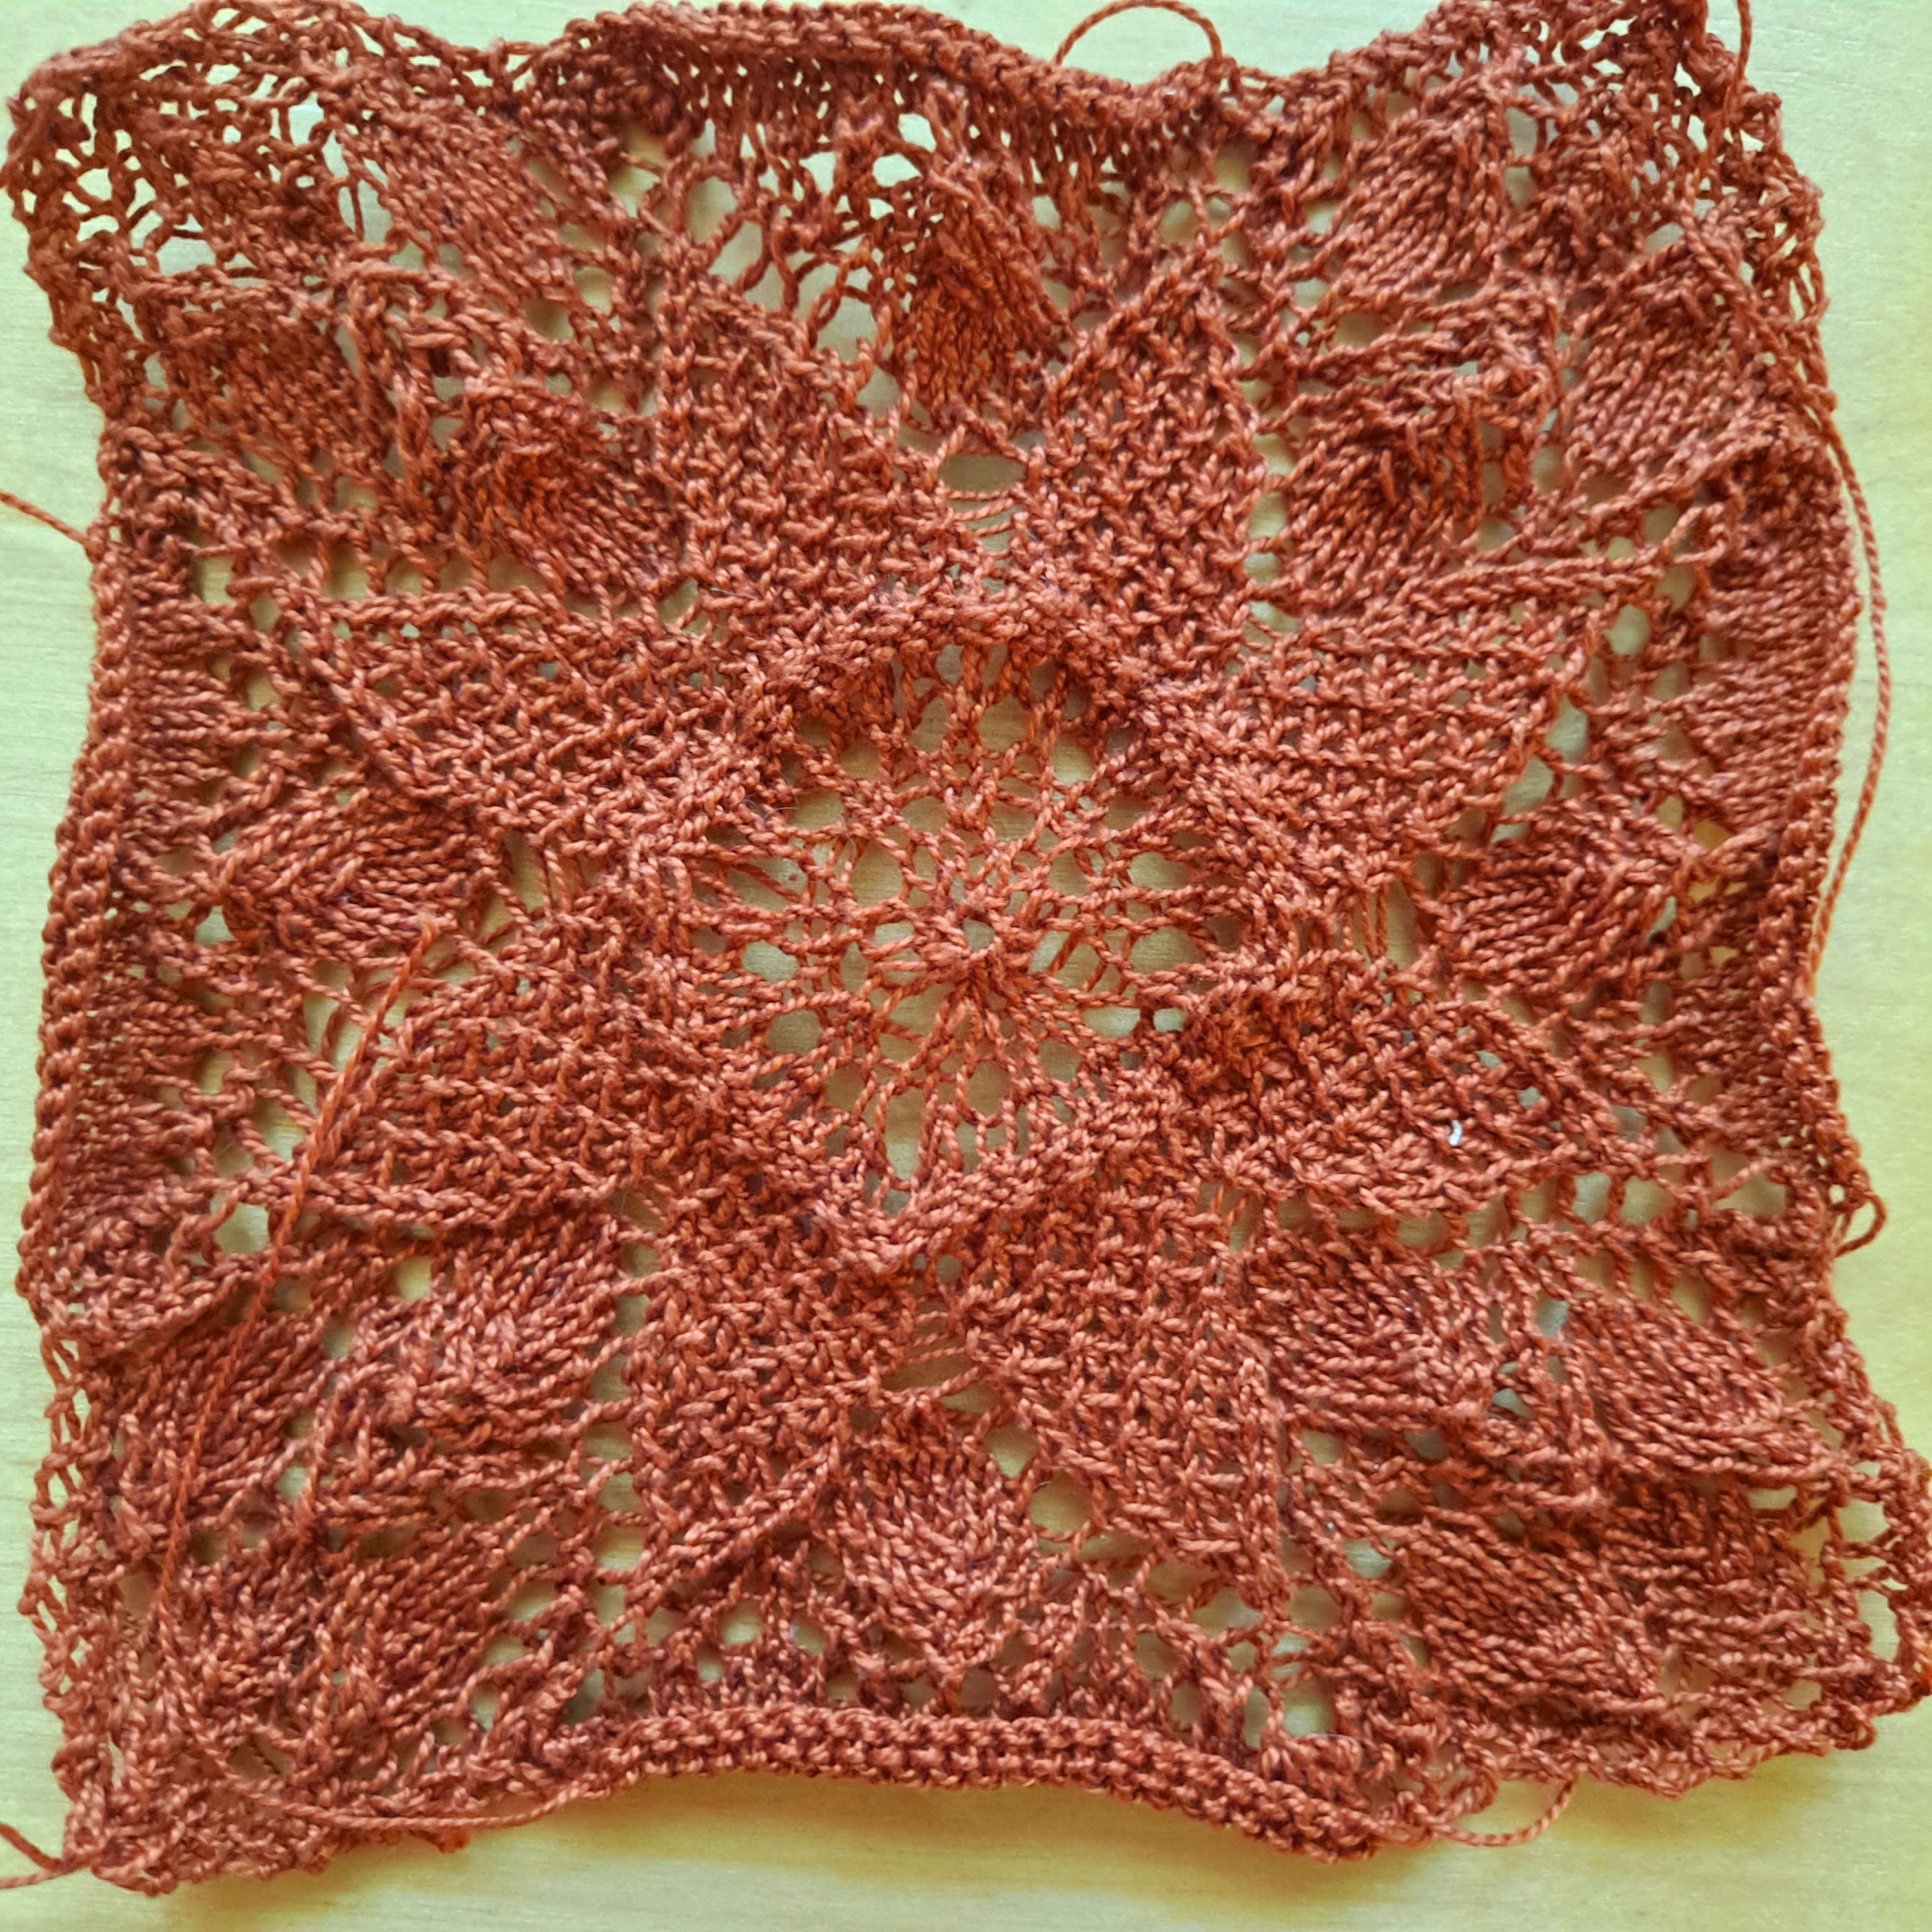 An image of a lacy square knitted in copper yarn with an eight-petaled flower worked into the lace